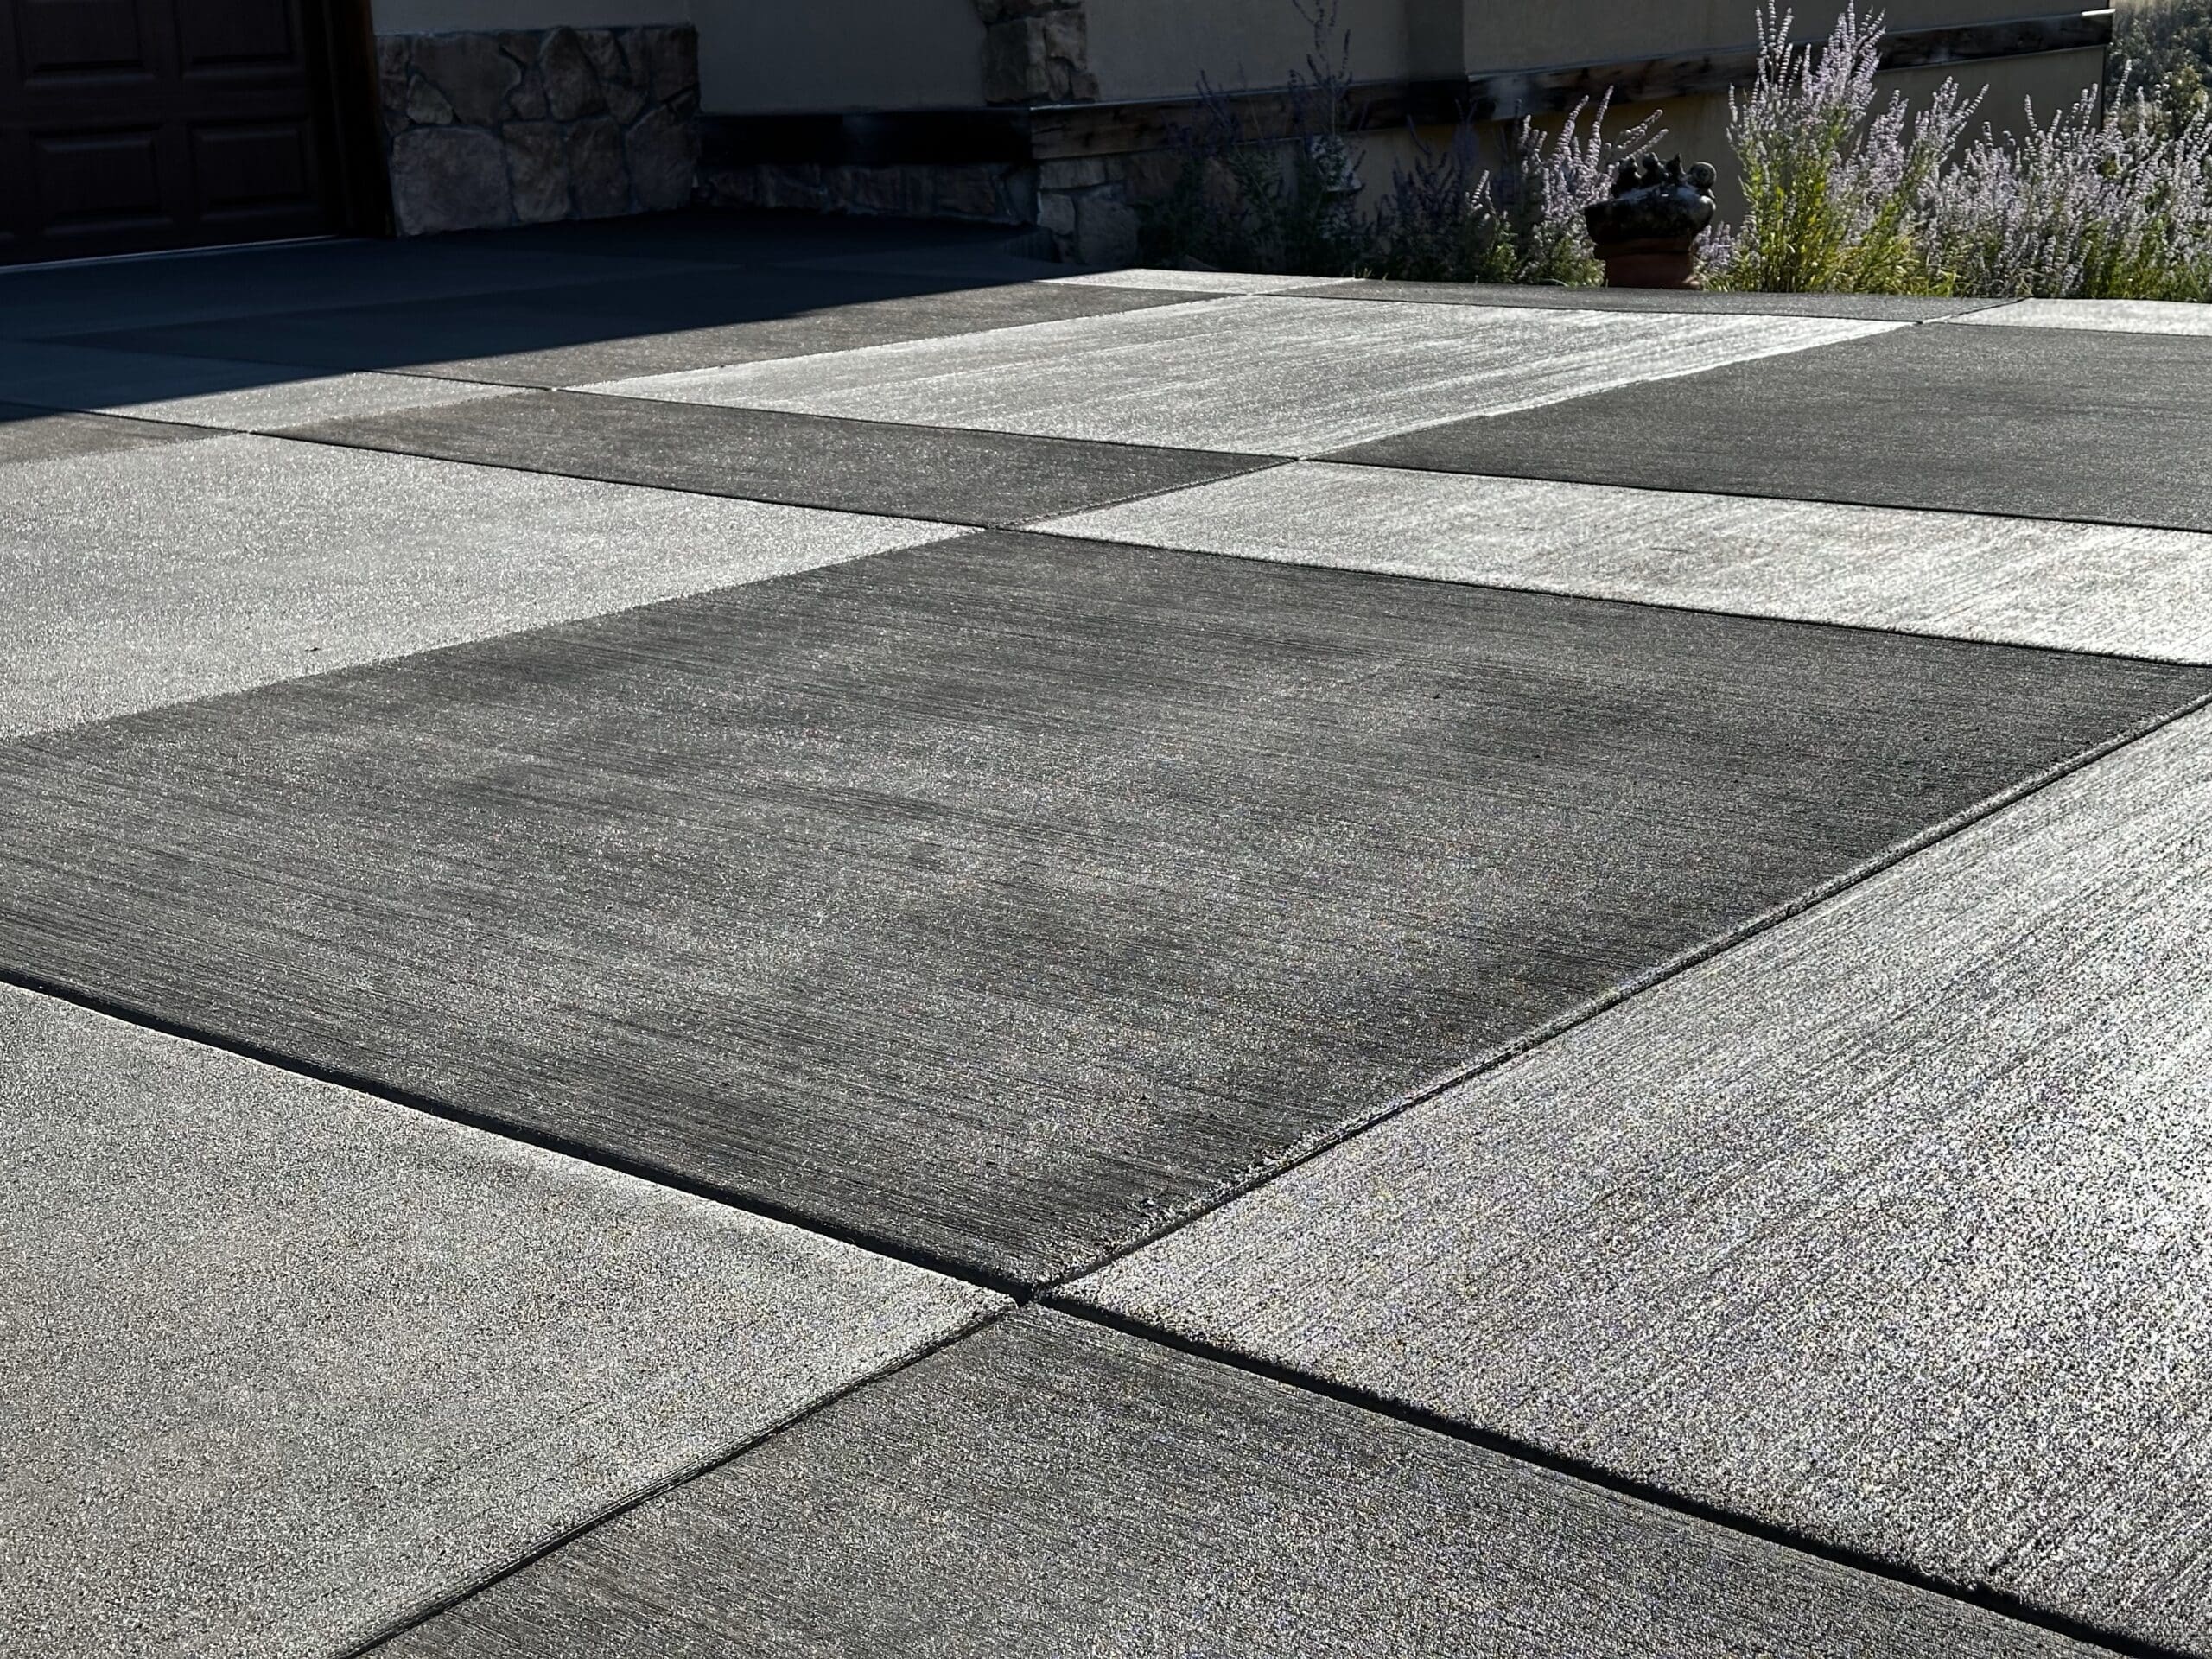 Black and white driveway created by a concrete contractor.